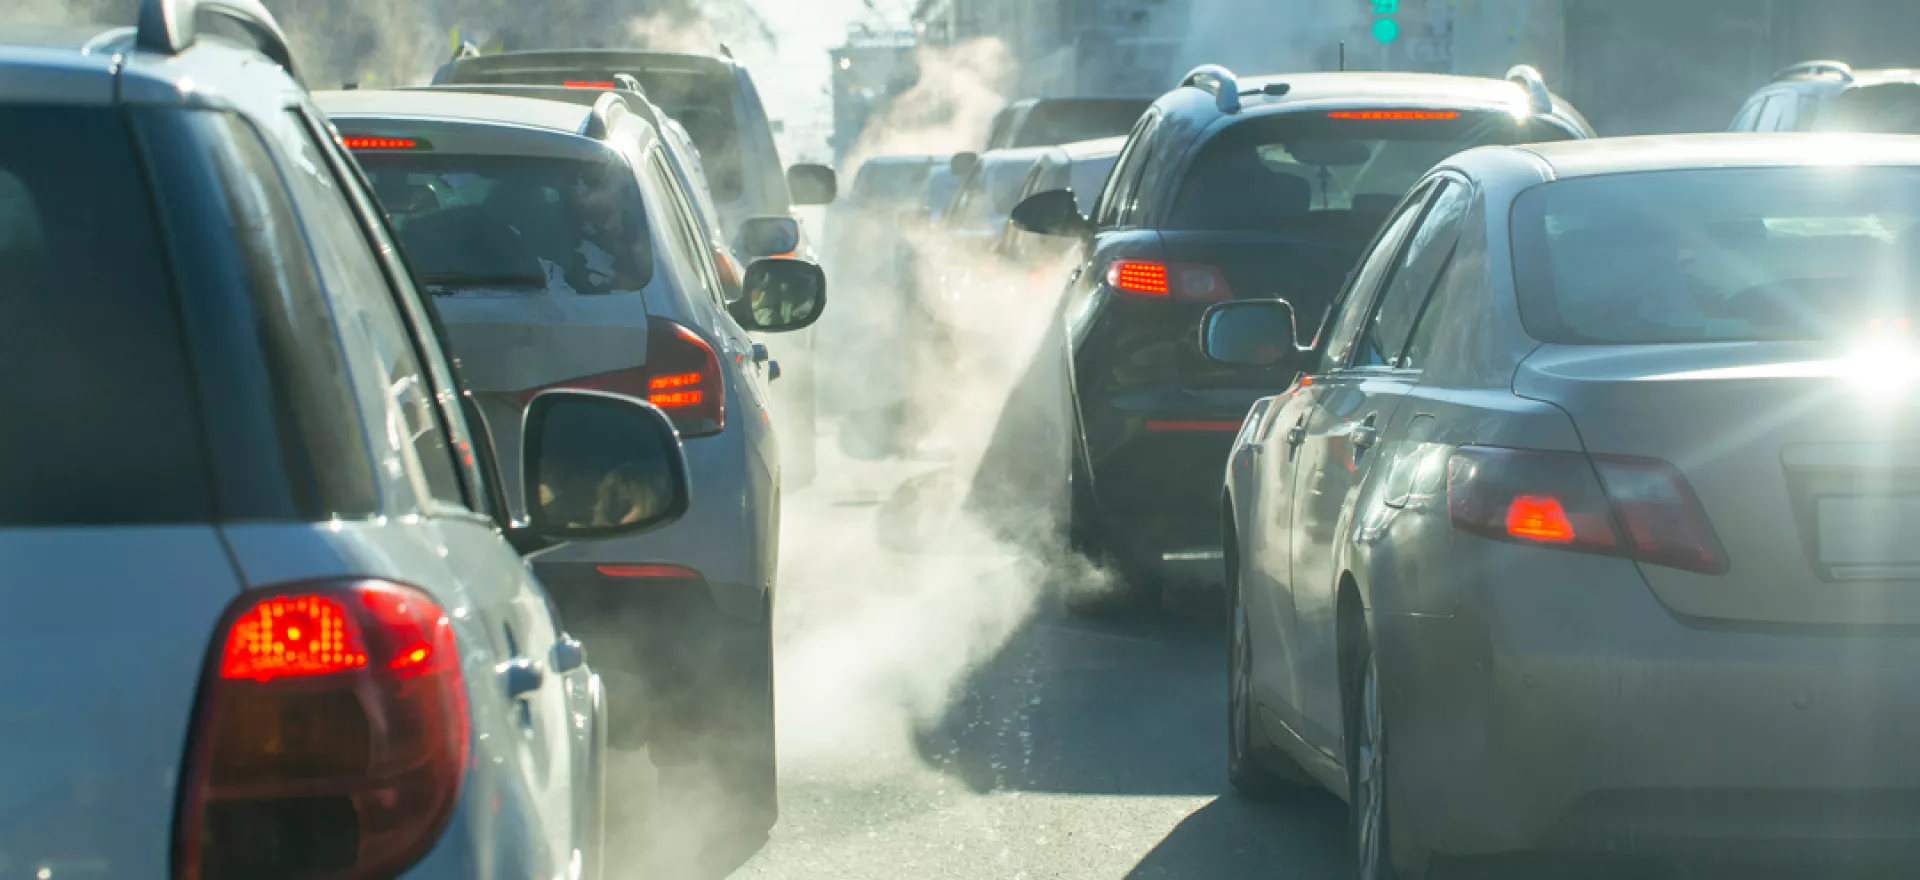 Air pollution: exhaust fumes from road traffic